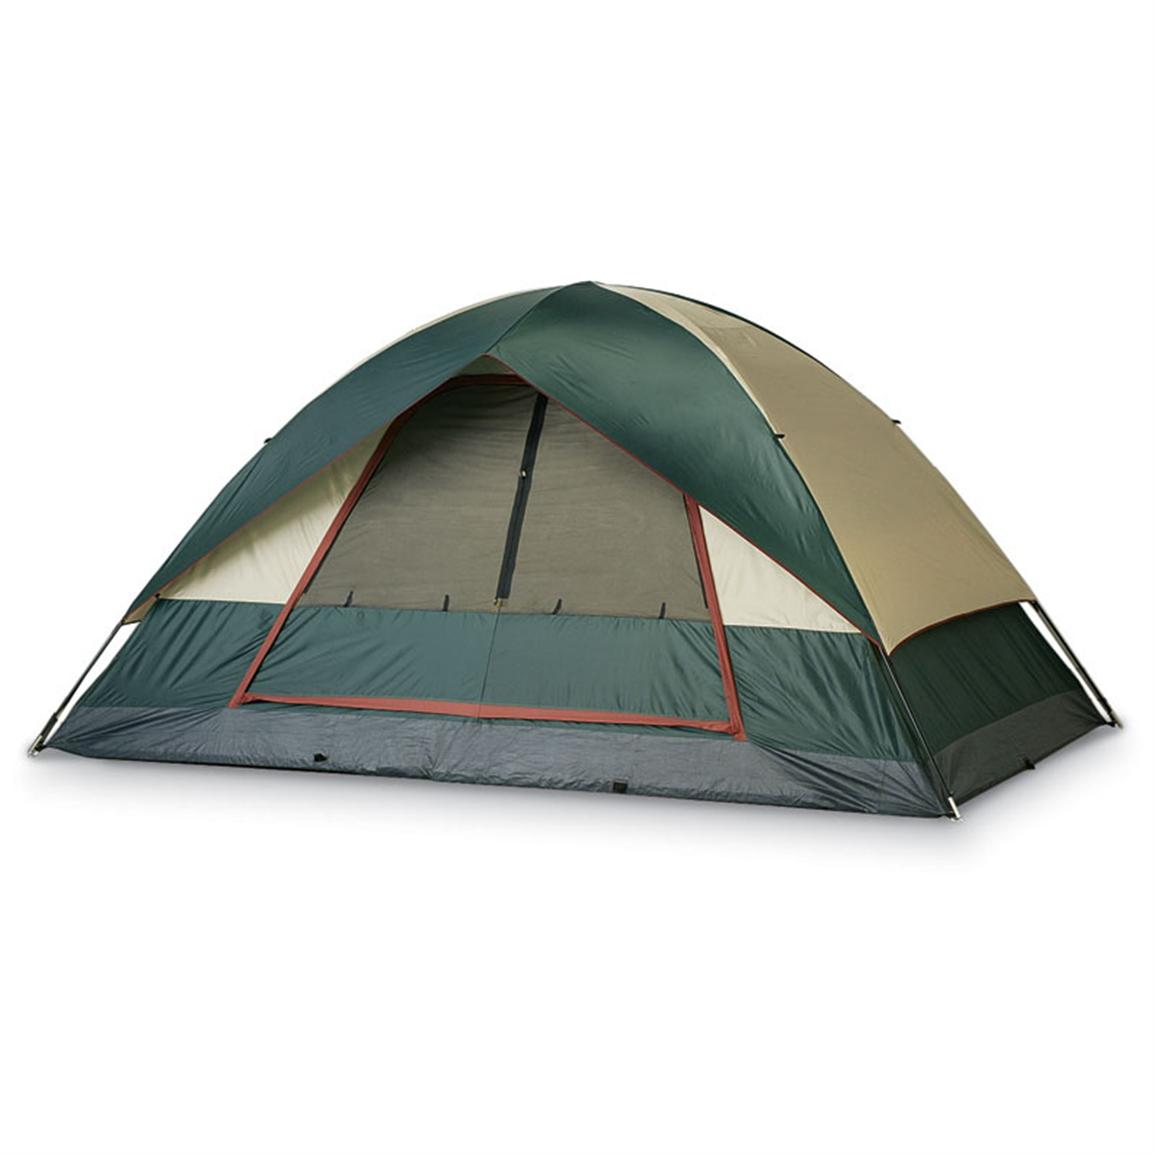 10 x 12' Winnebago® 2Room Dome Tent 73940, Backpacking Tents at Sportsman's Guide